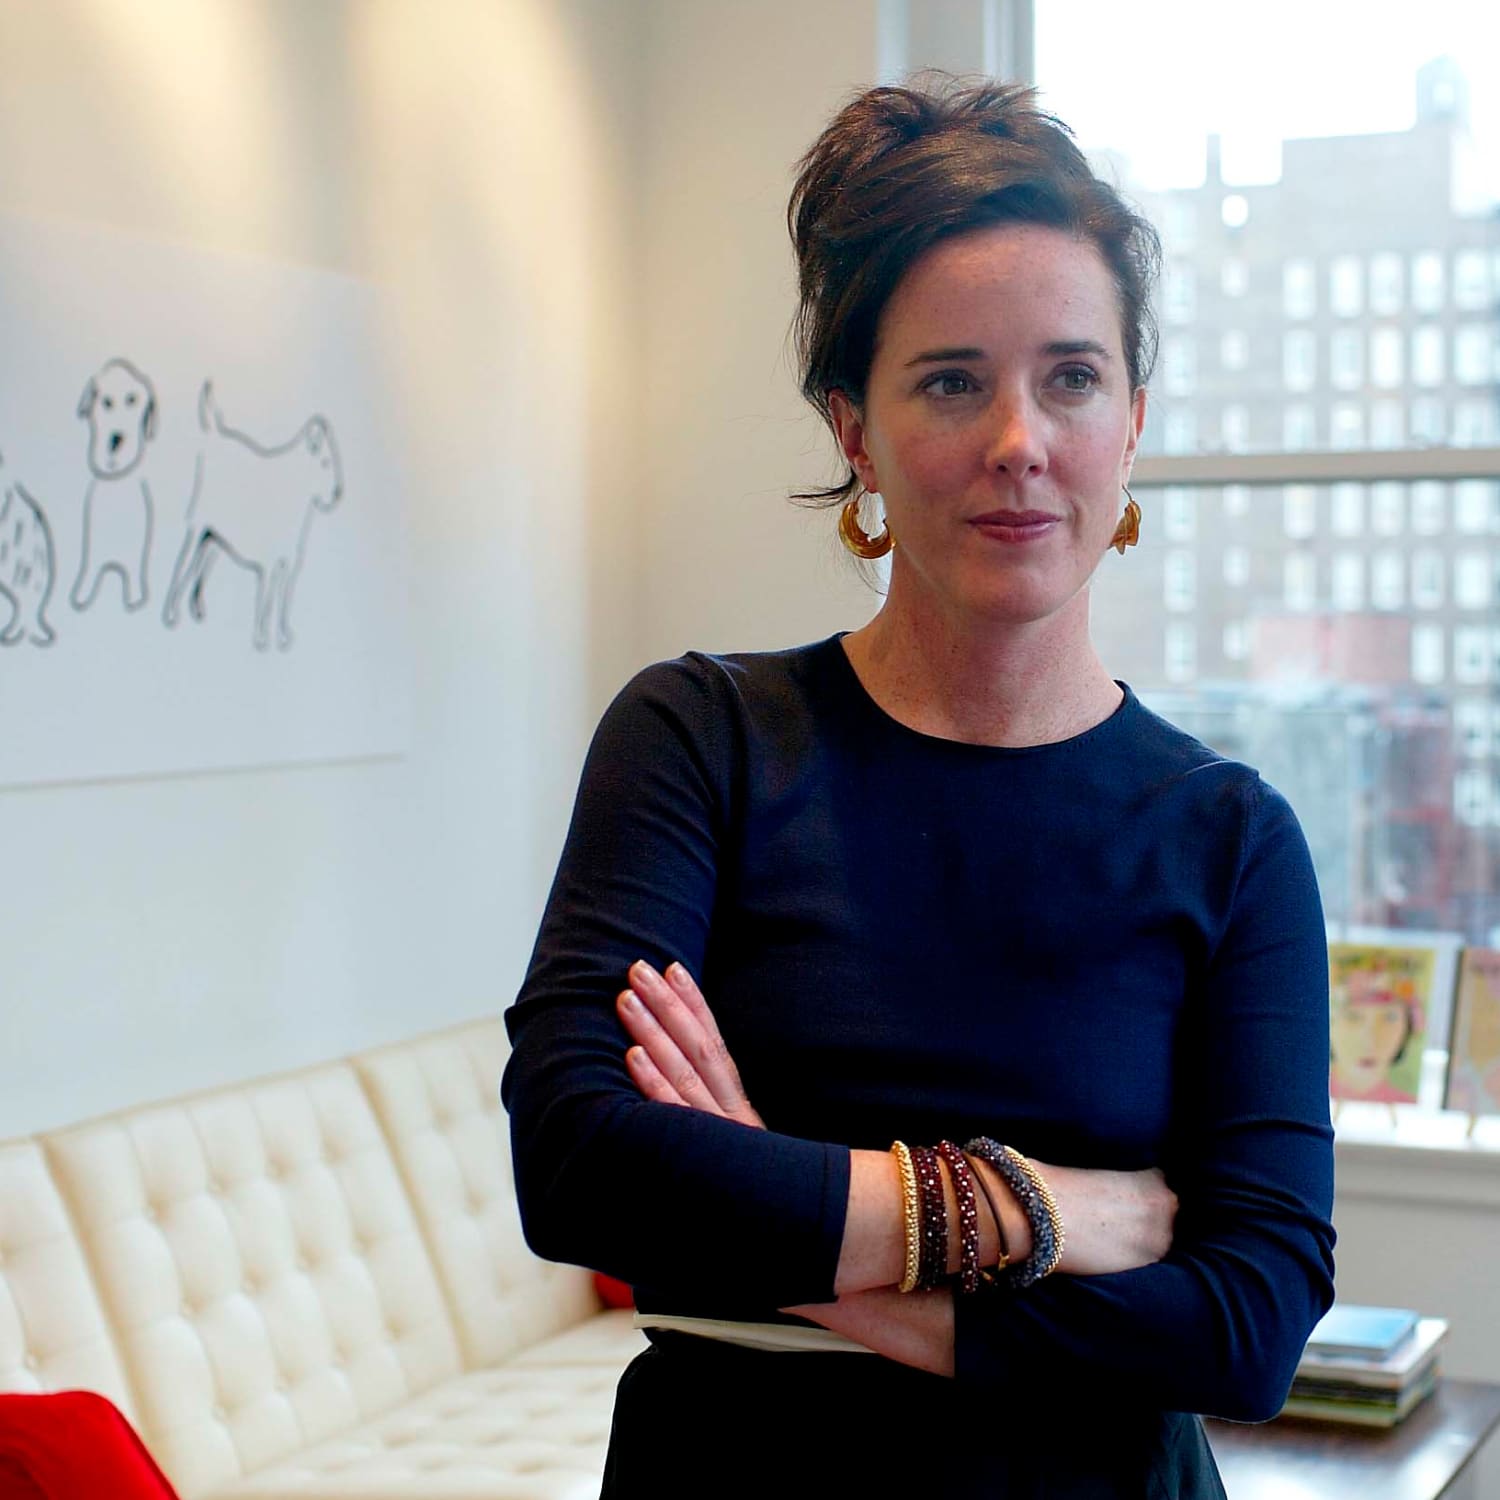 Remembering Kate Spade's Iconic Design Style | Apartment Therapy